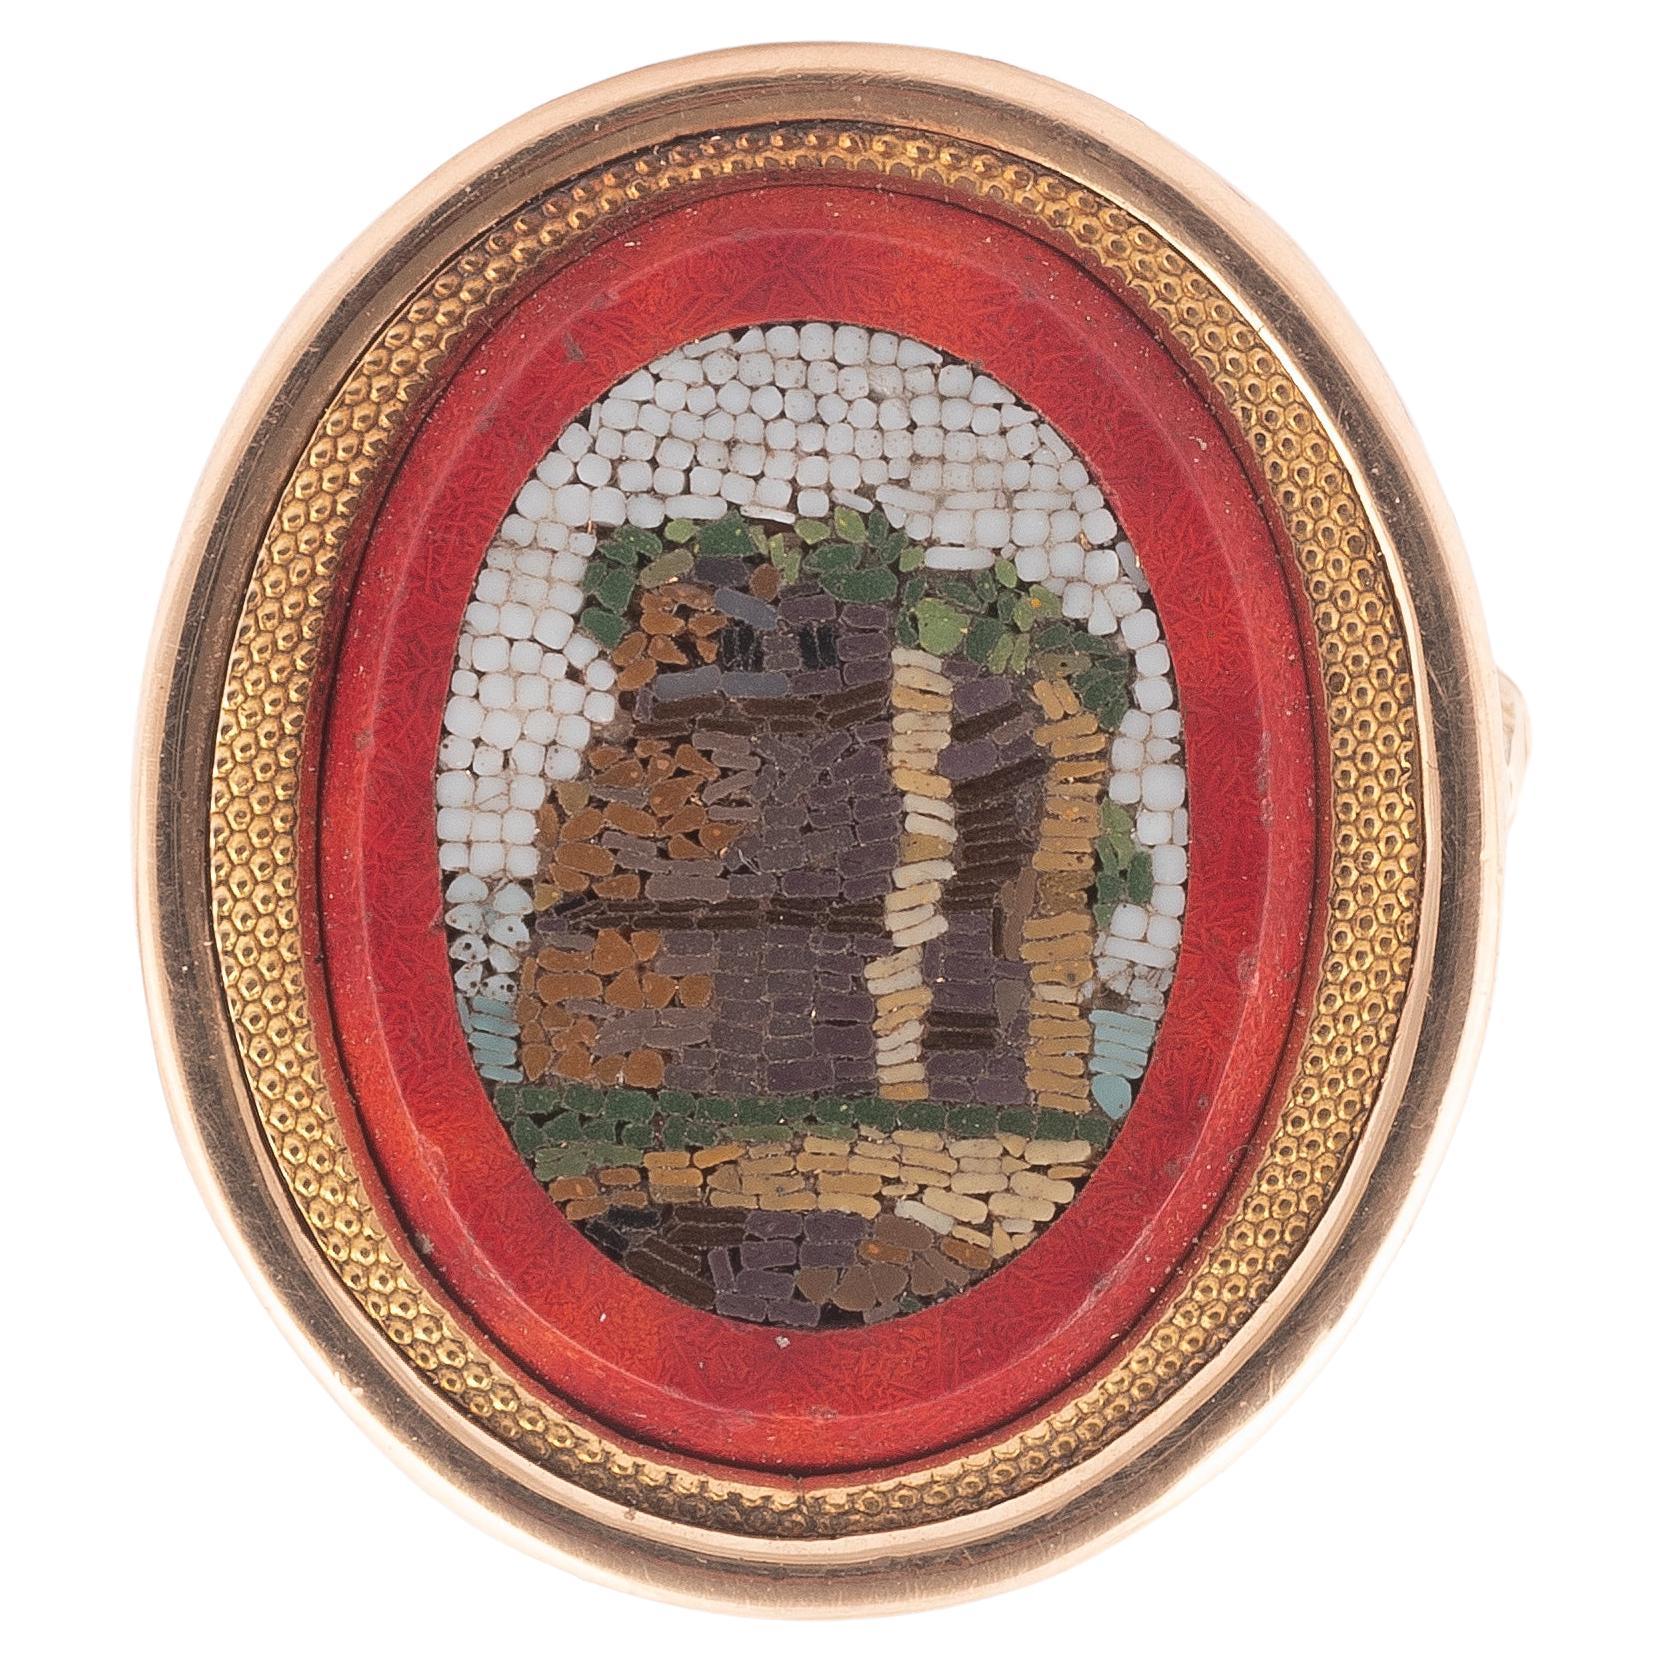 The oval panel inlaid with an oval micromosaic, depicting a classical architectural scene, yellow precious metal mounted, ring size 7.